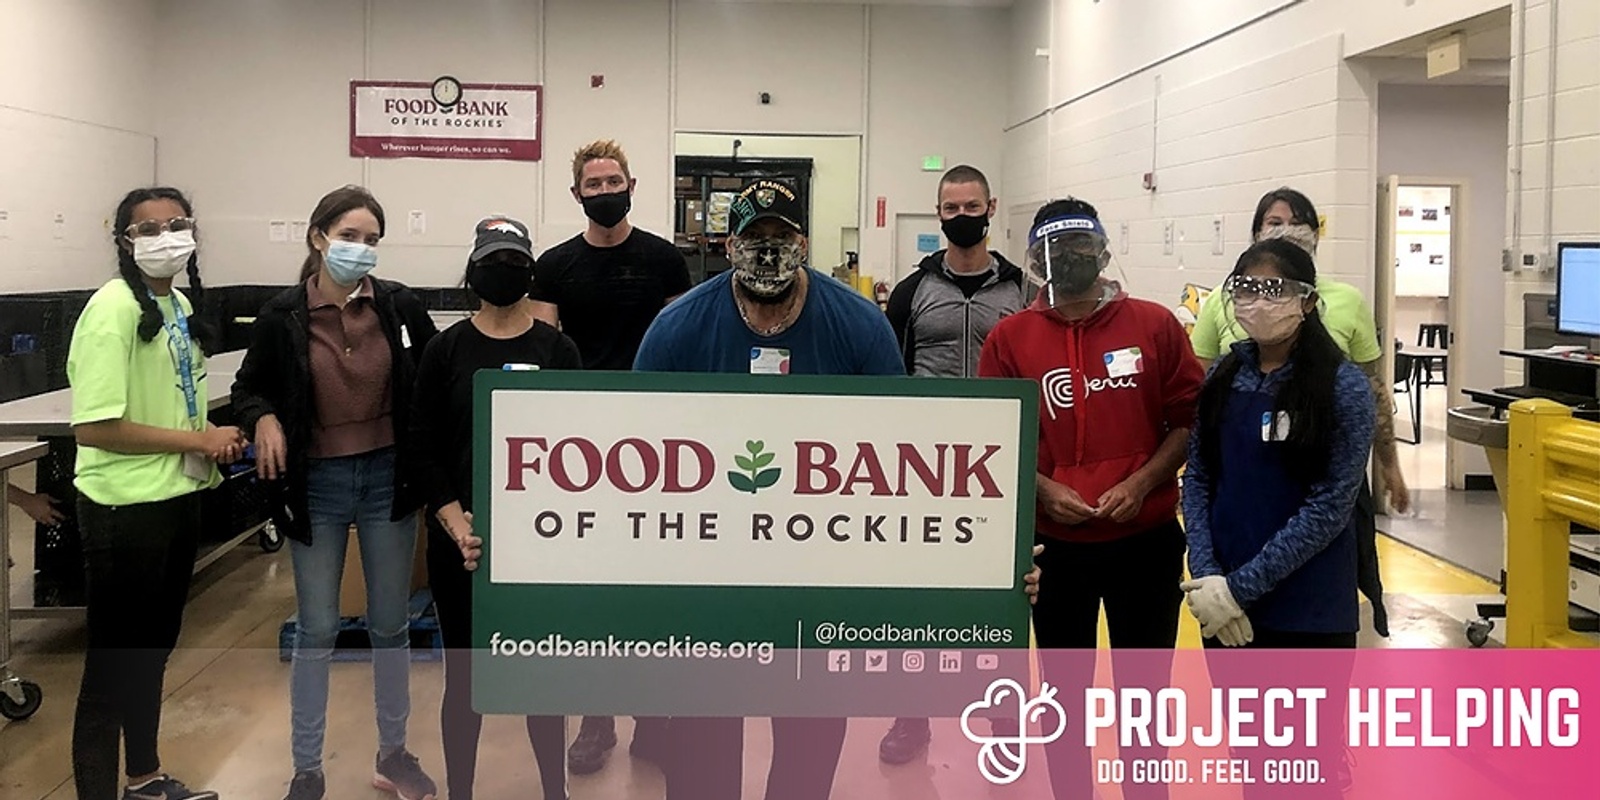 Inspect and Sort Donated Food for Those in Need (Food Bank of the Rockies)